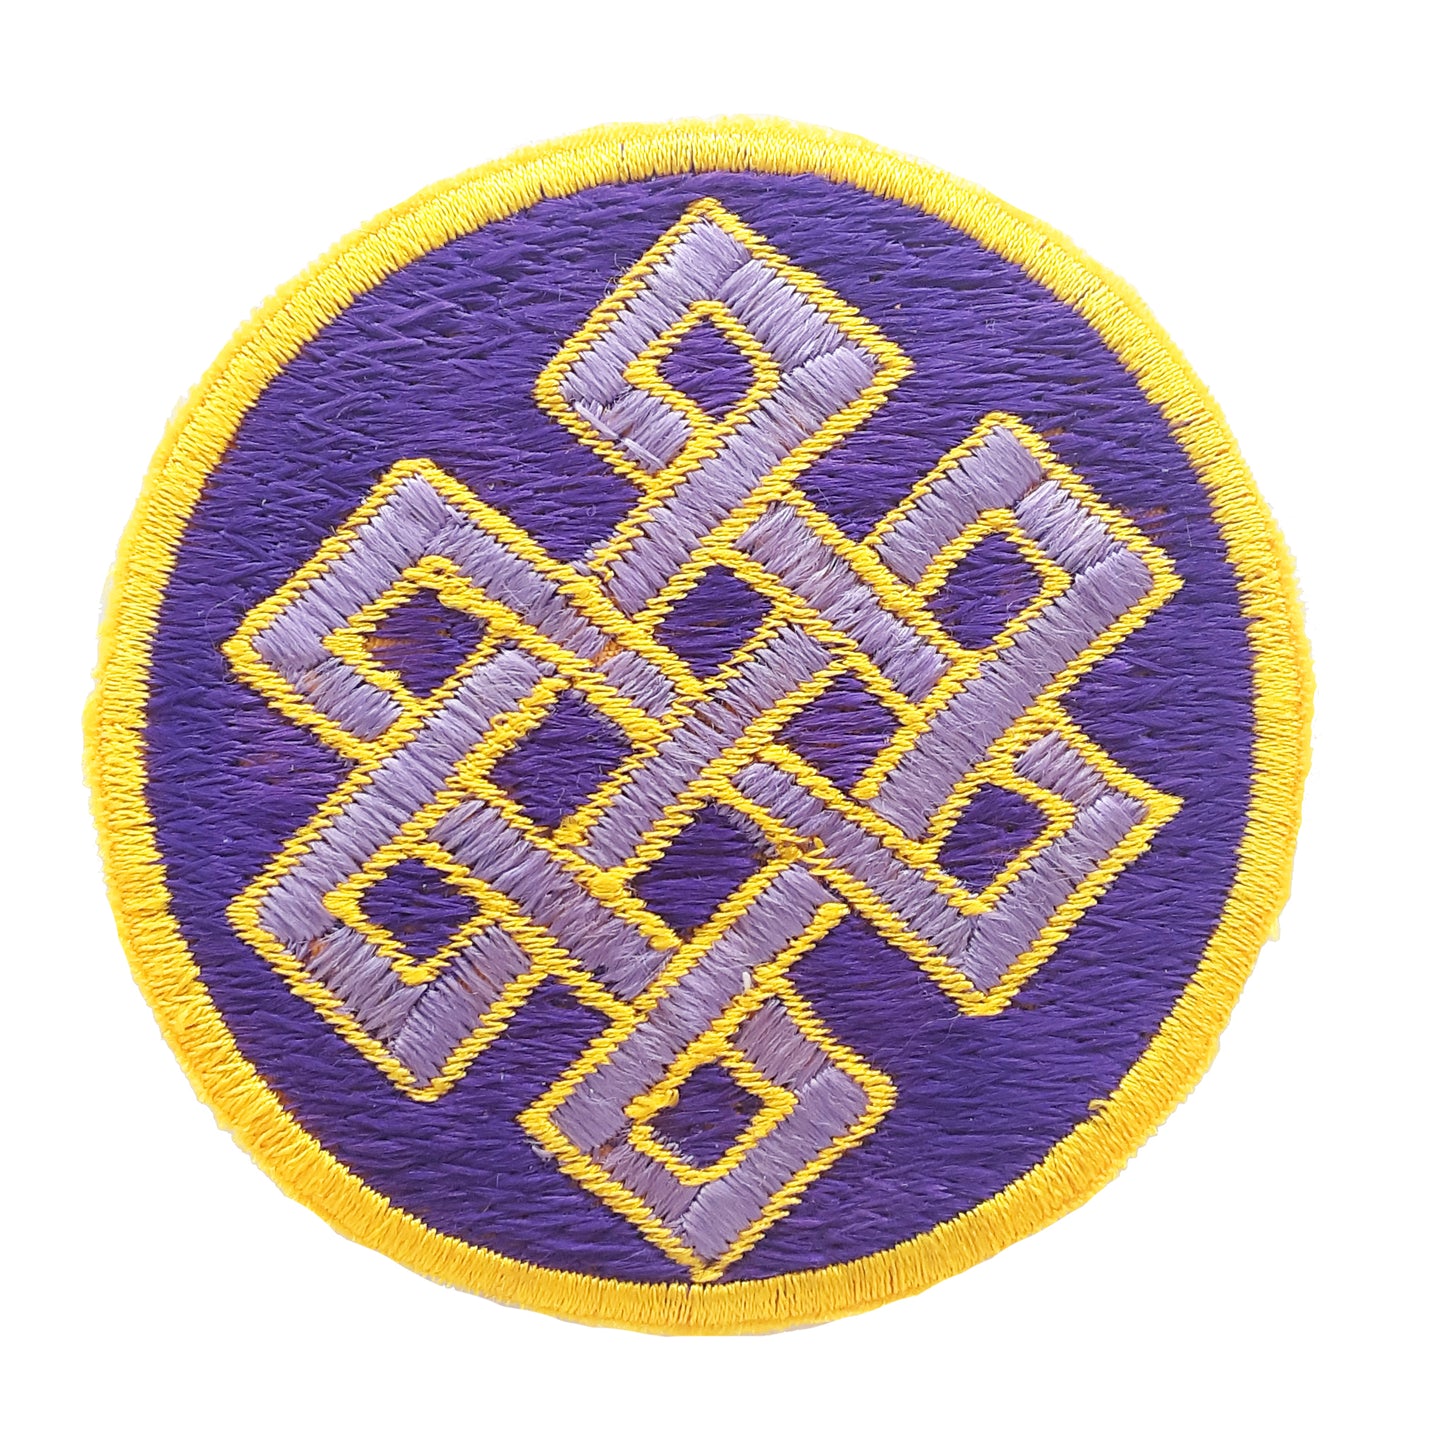 Infinite Knot Patch